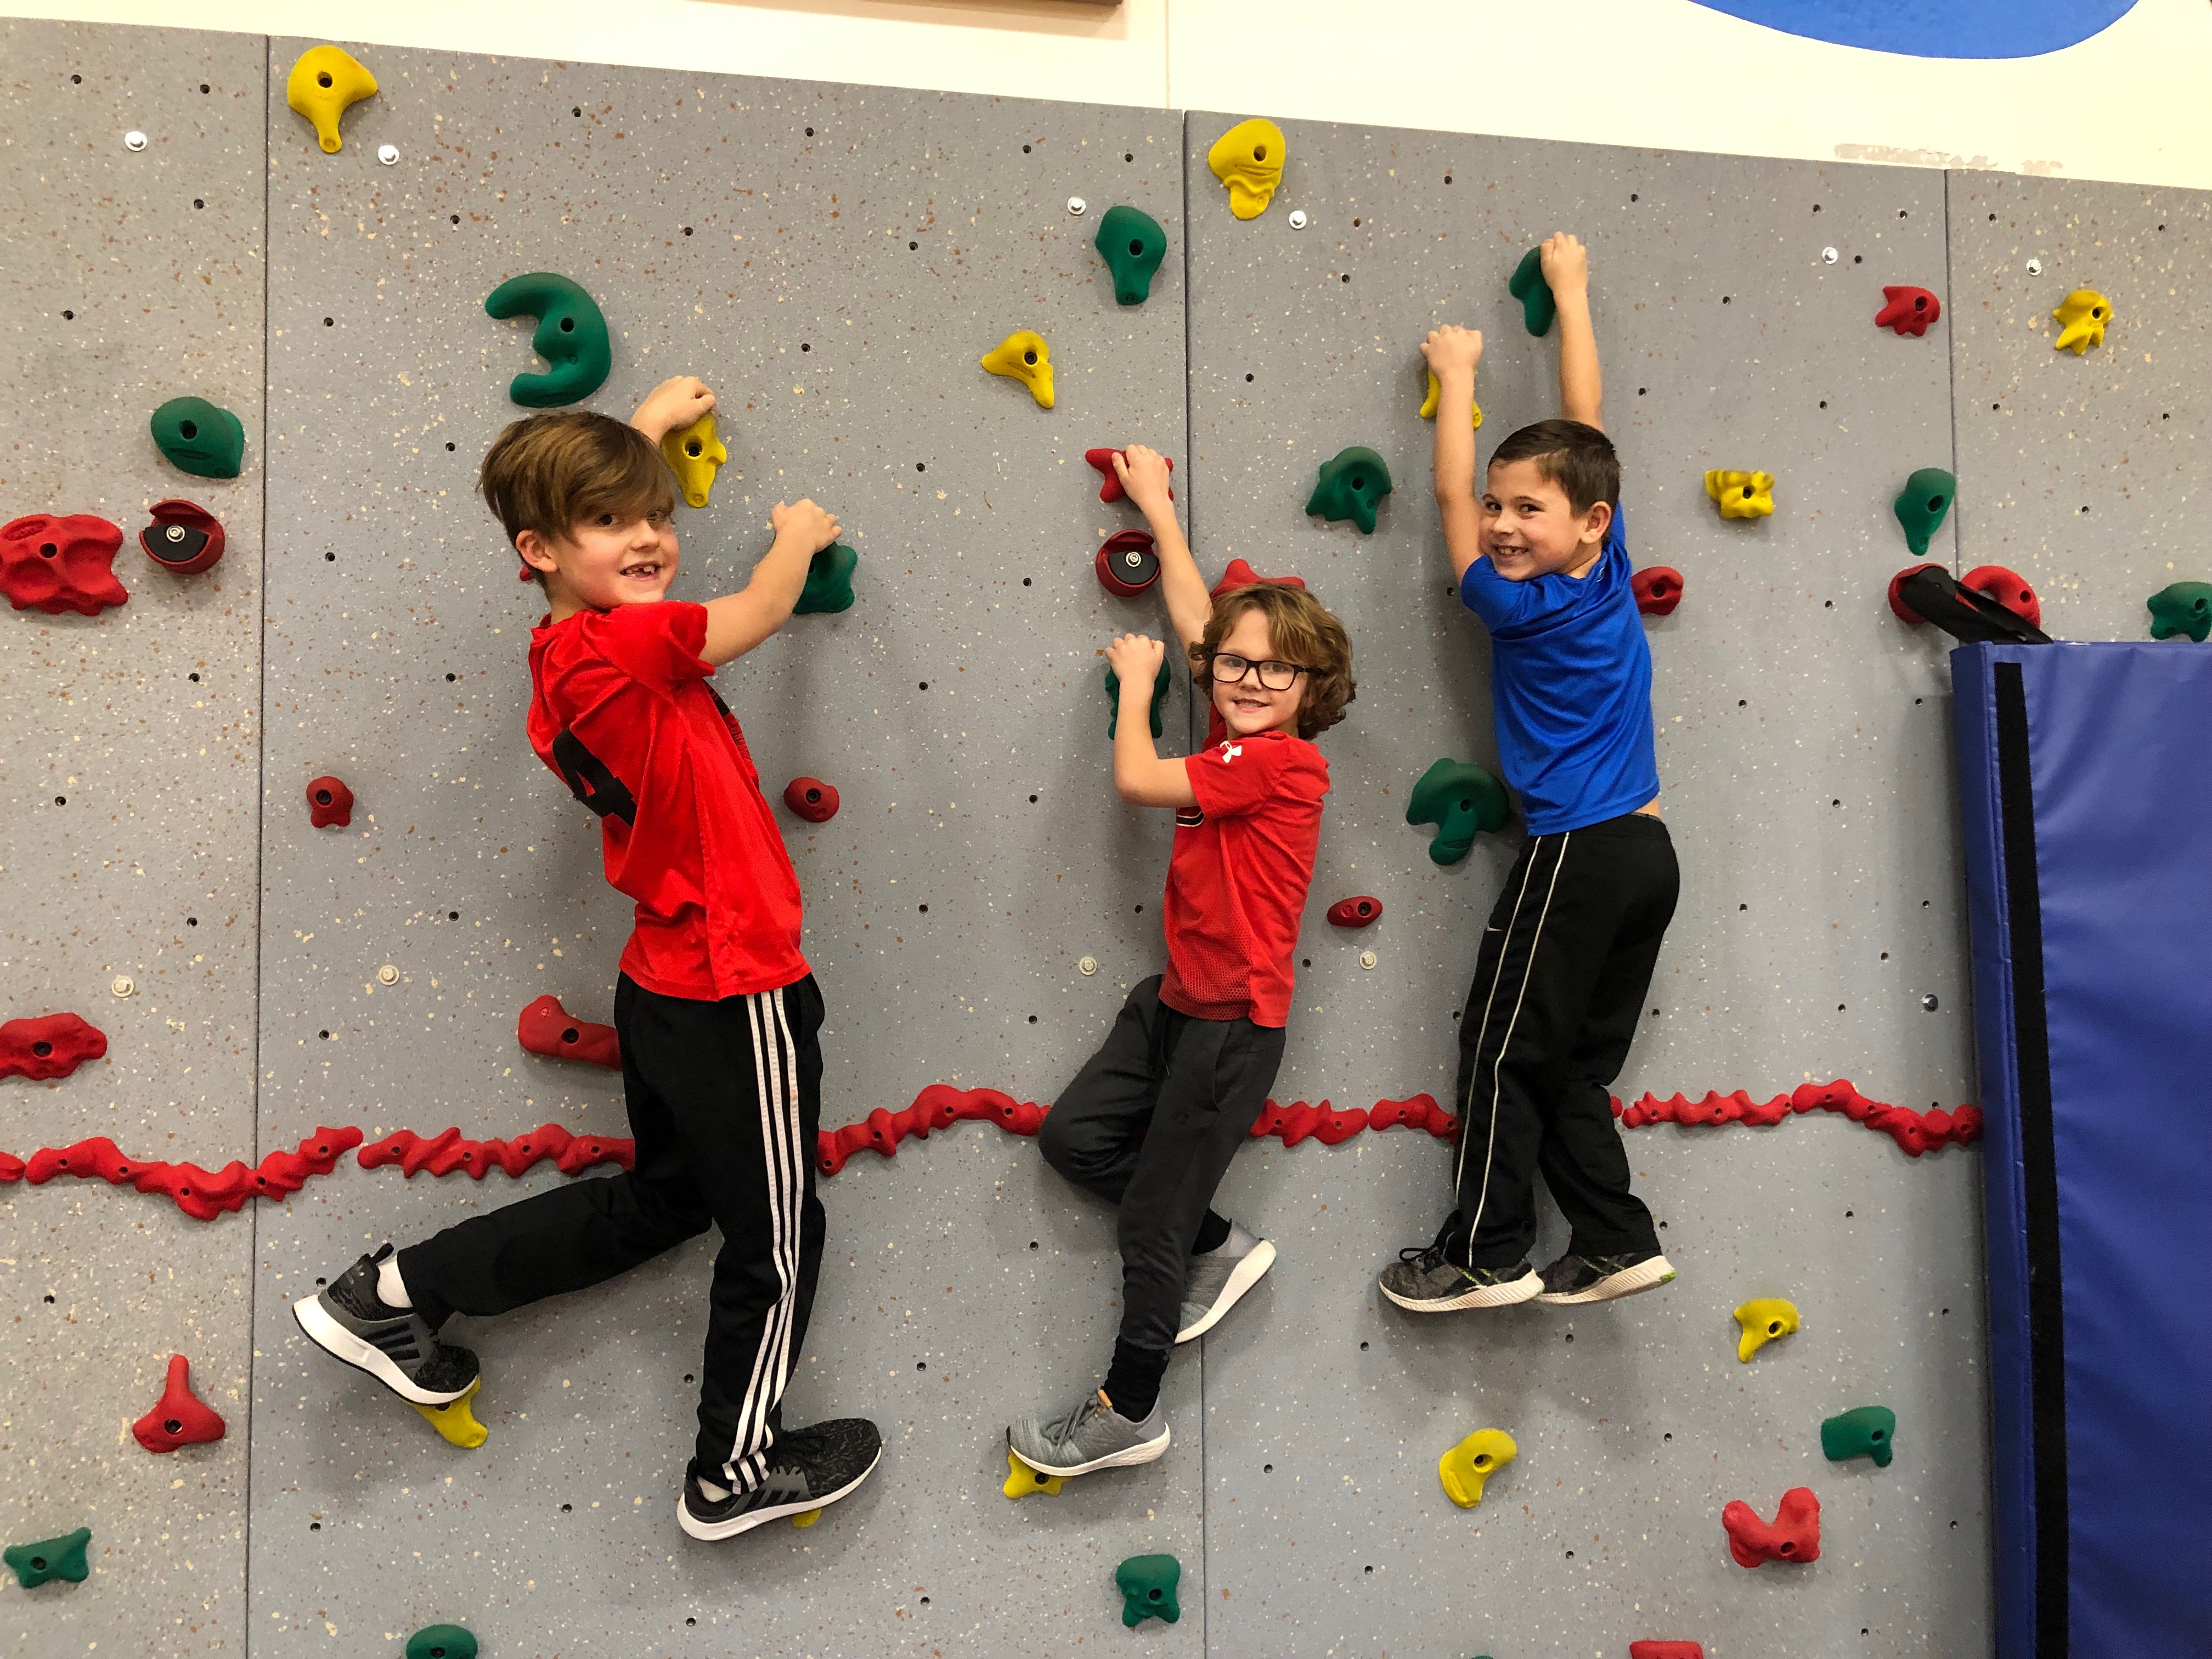 Three students practicing on a mountain climbing wall